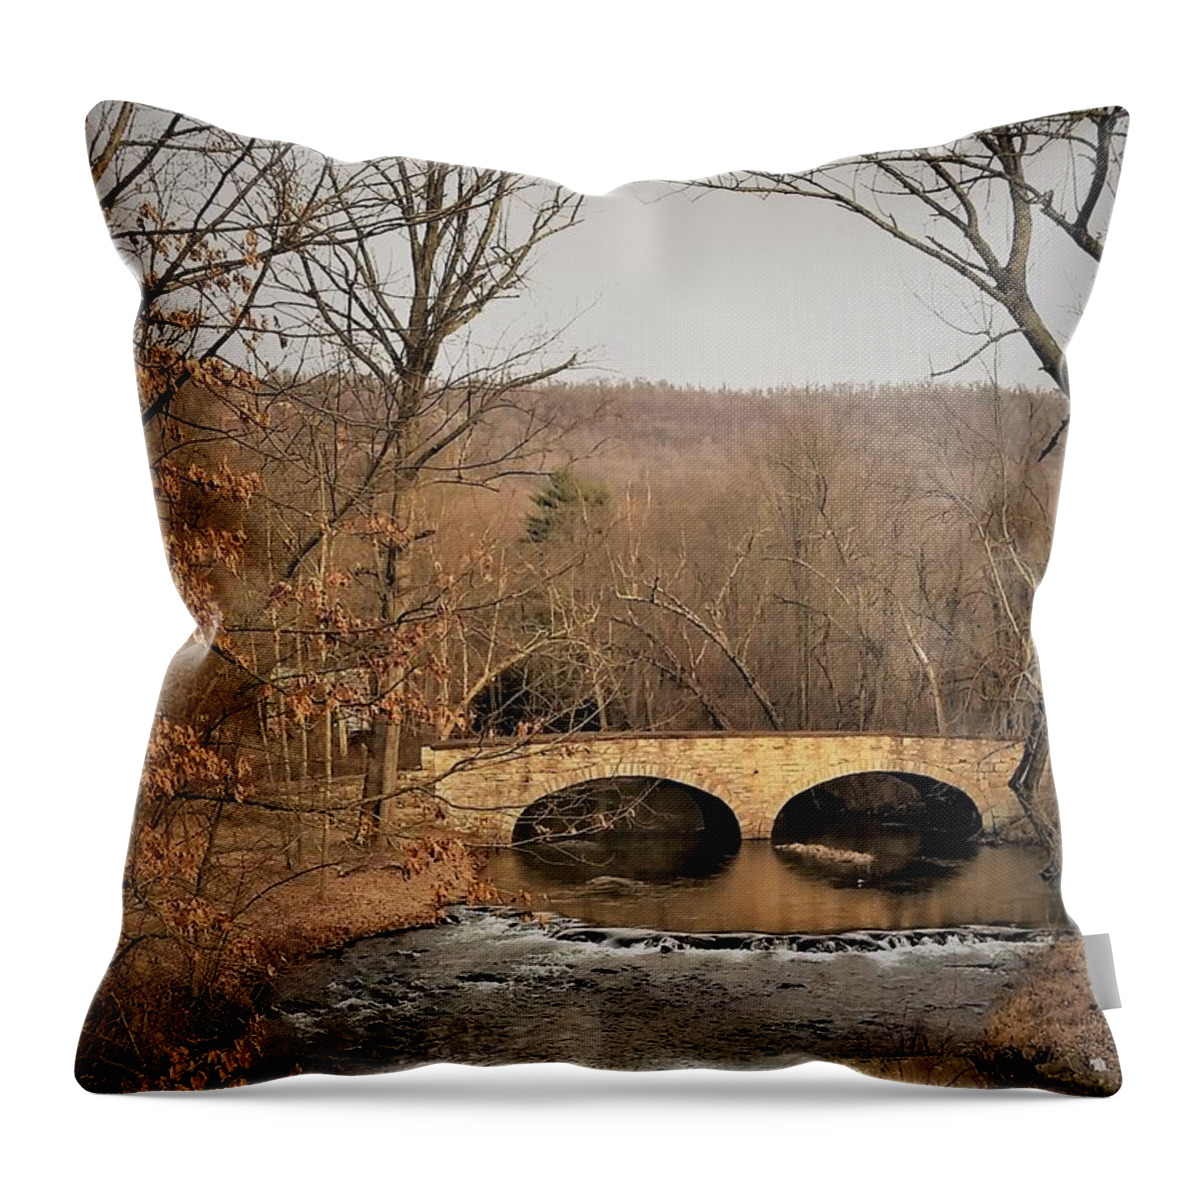 Stone Throw Pillow featuring the photograph Clarks Valley Stone Bridge by Jacqueline Whitcomb